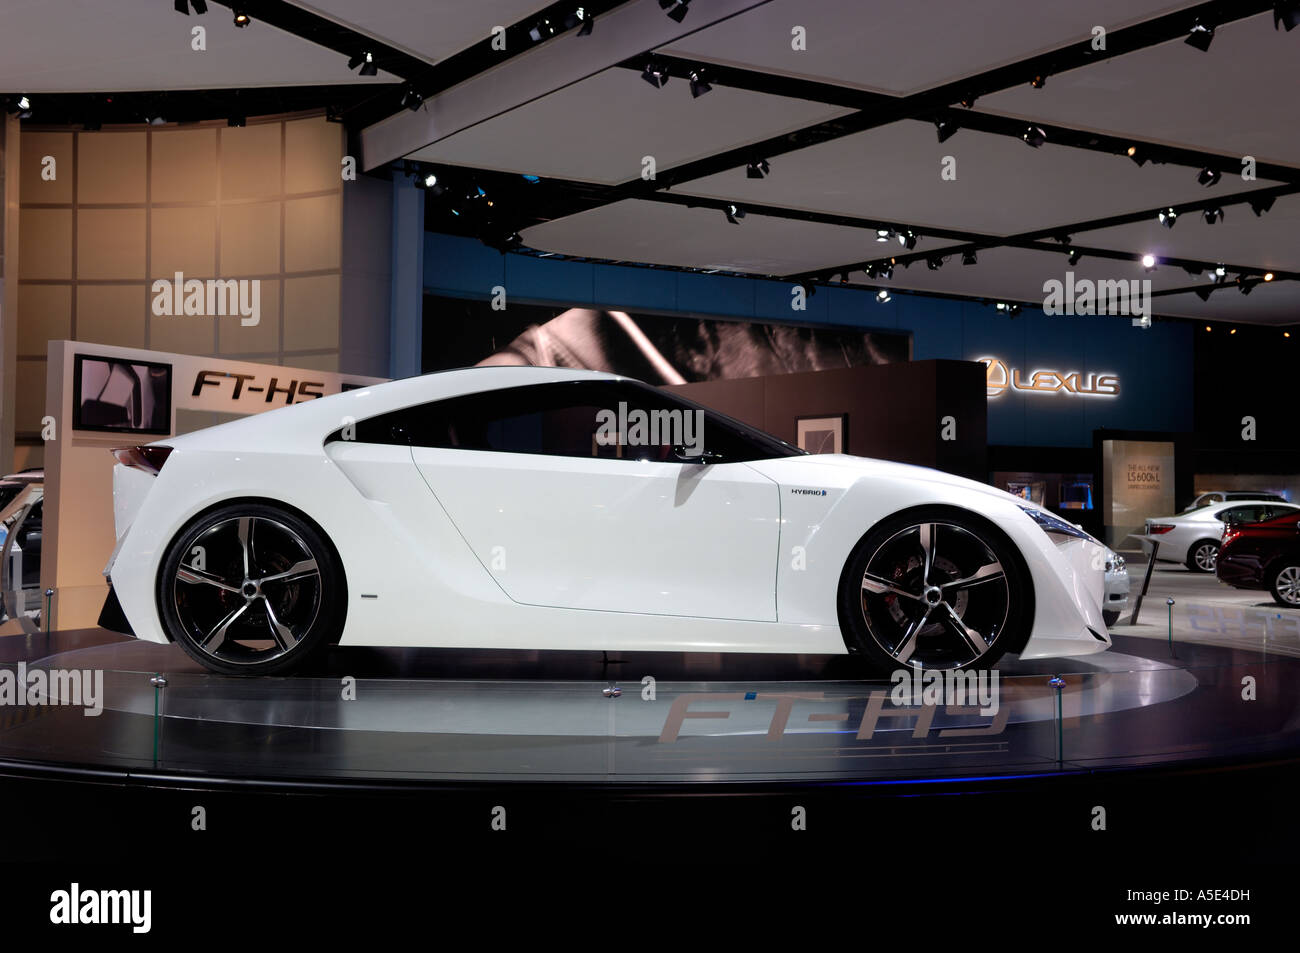 The Toyota FT-HS concept car at the North American International Auto Show, 2007 Stock Photo